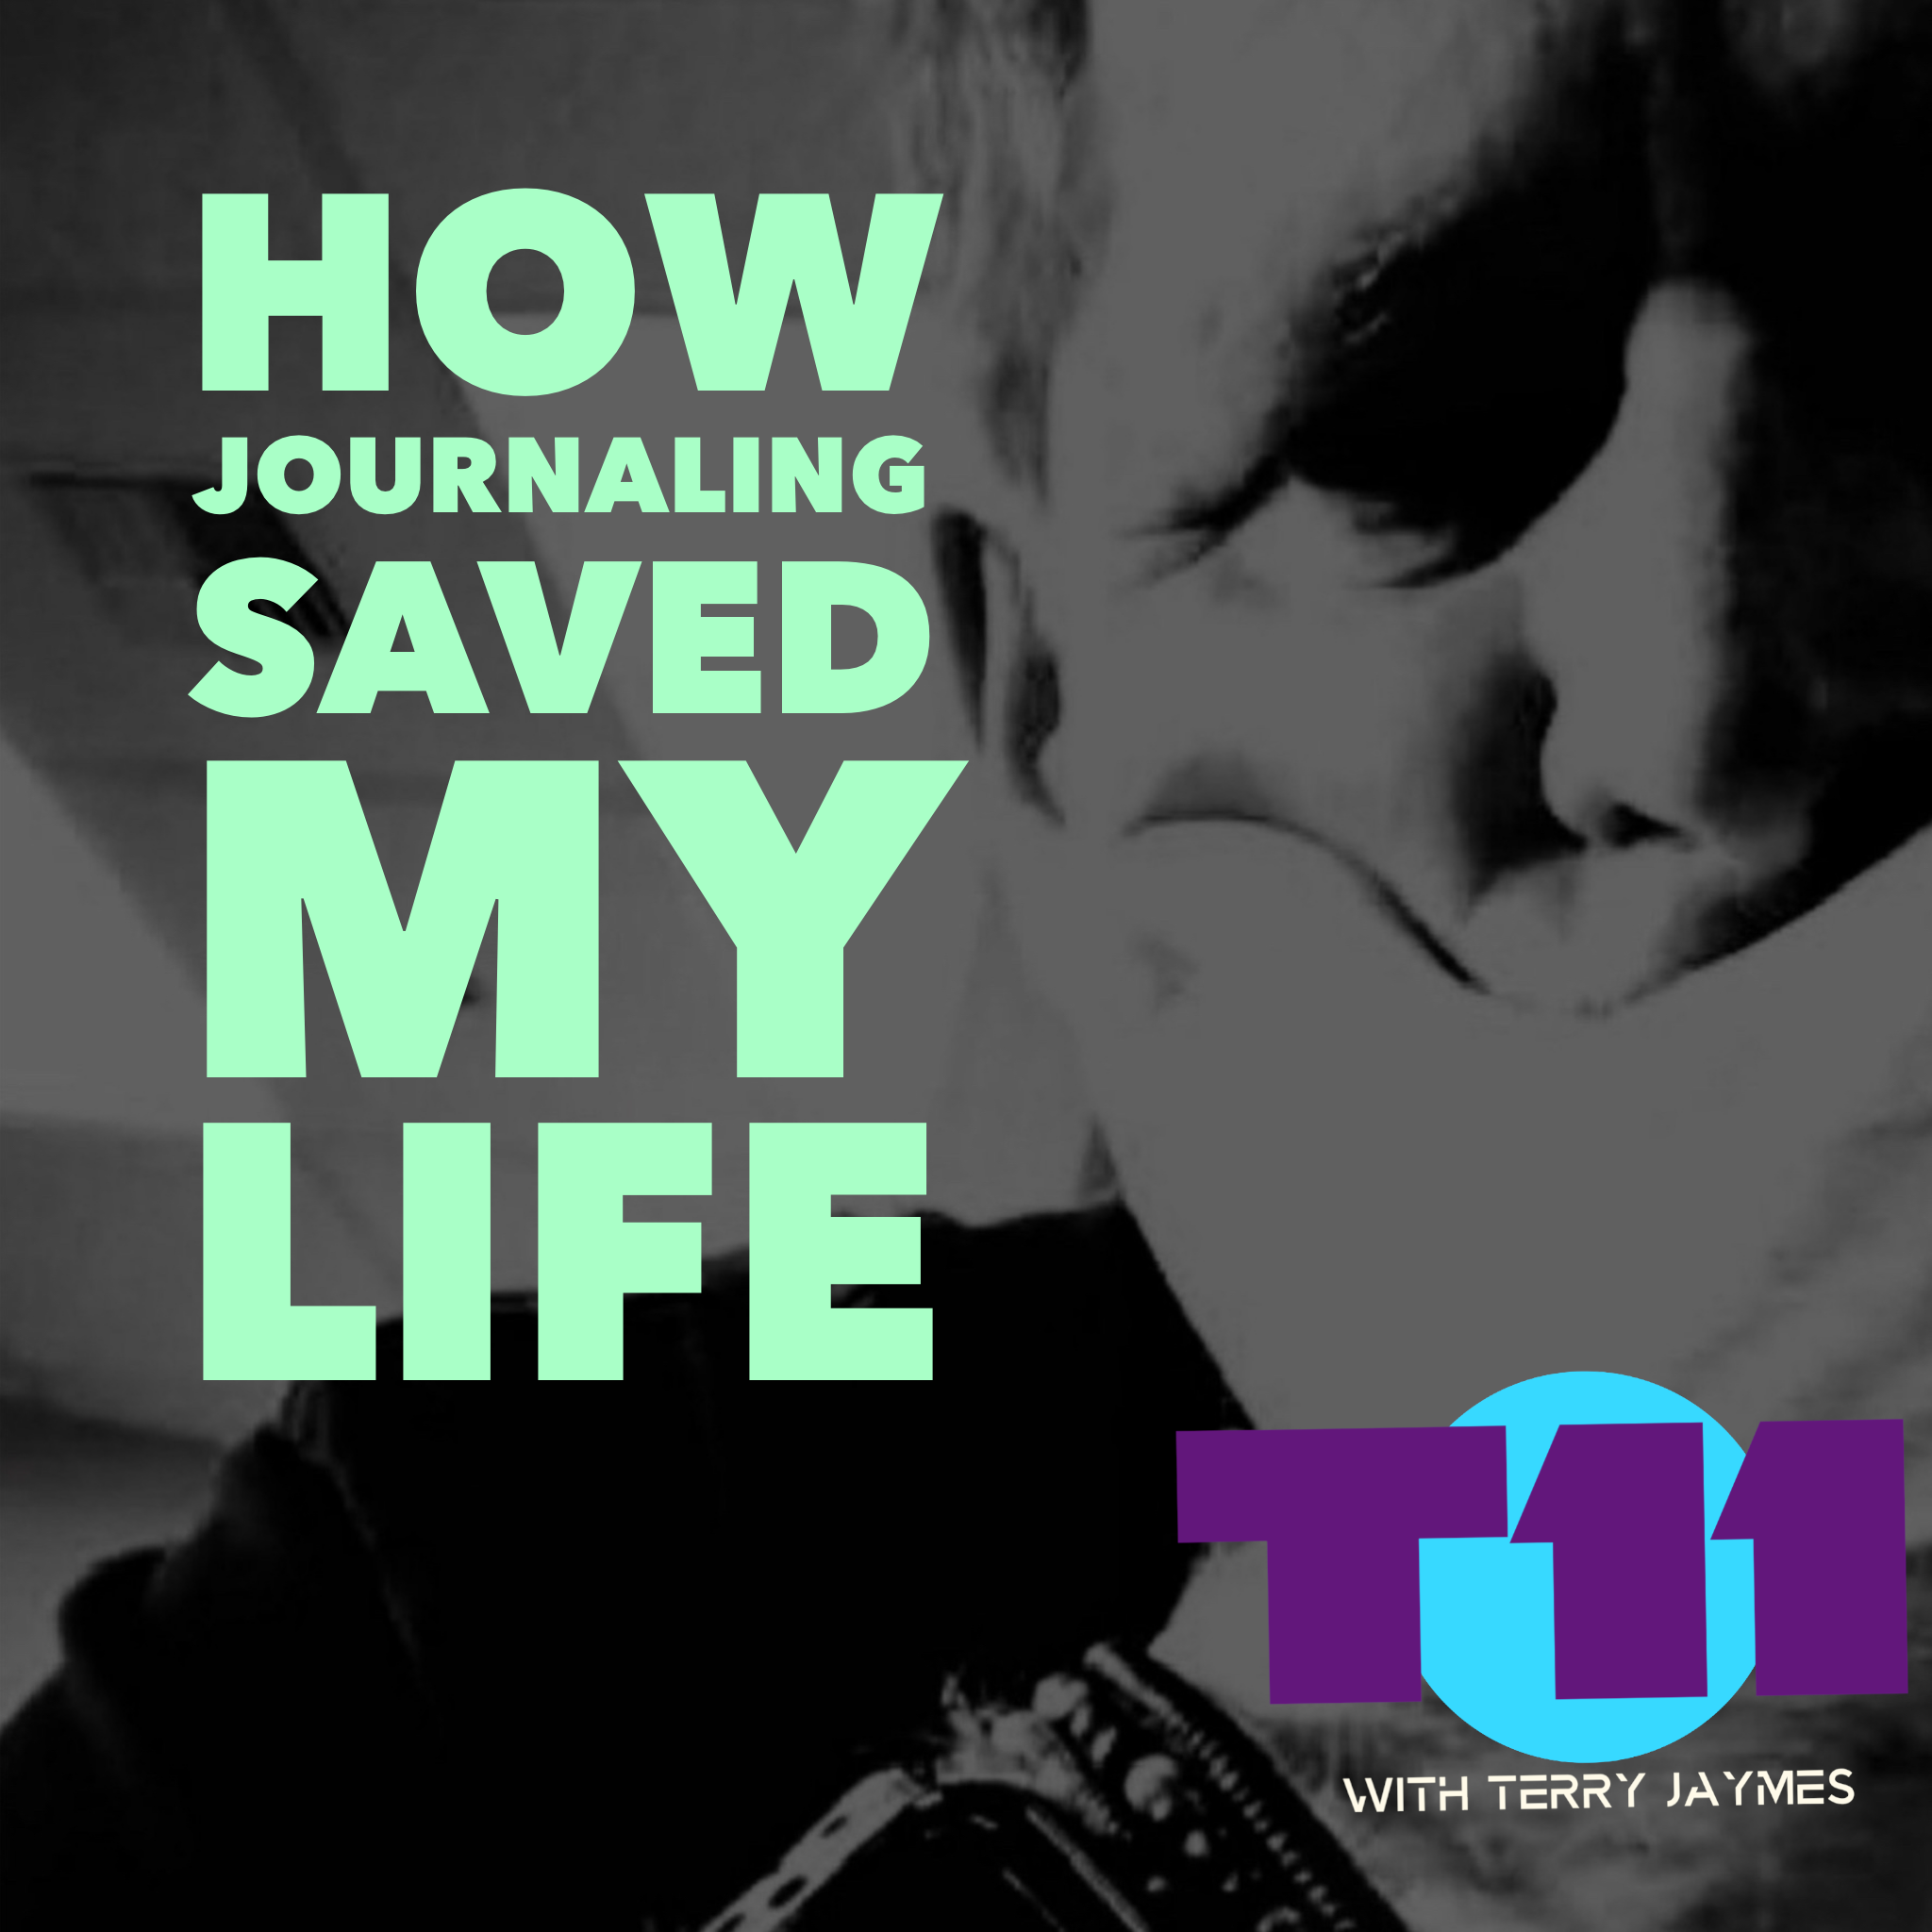 HOW JOURNALING SAVED MY LIFE